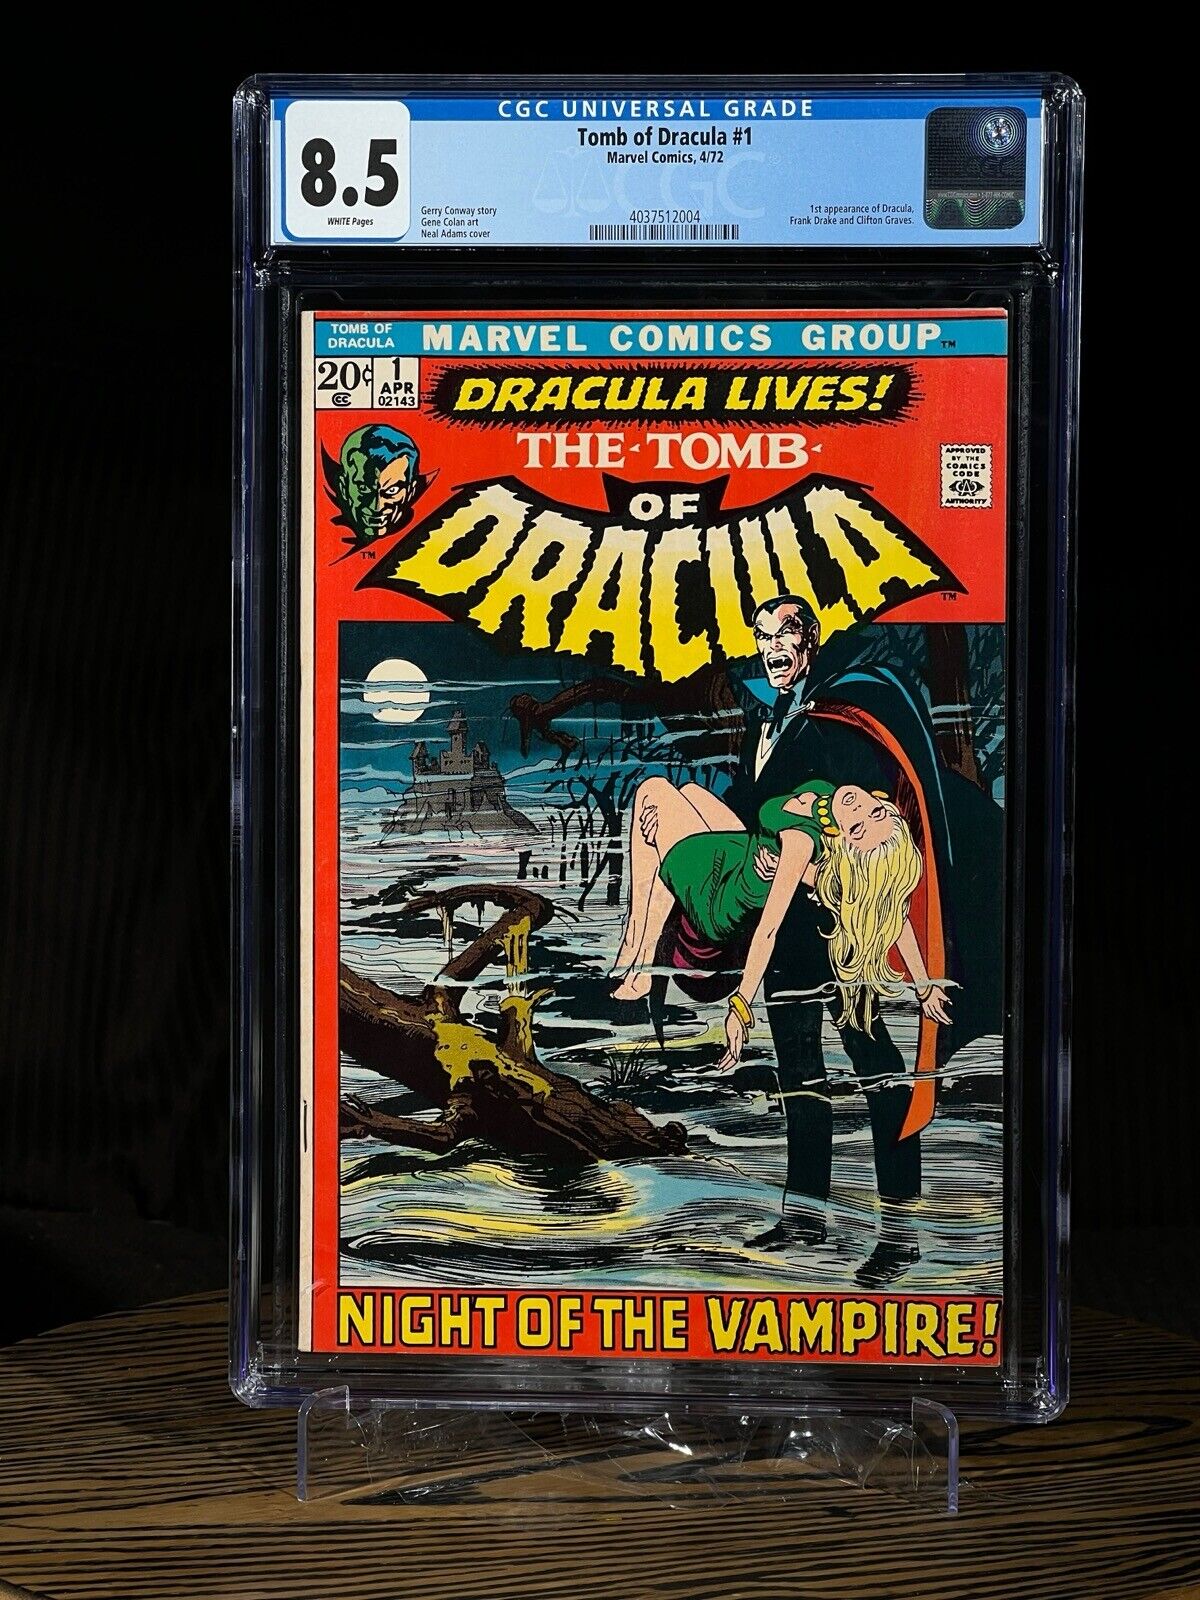 TOMB OF DRACULA #1 CGC 8.5 April 1972 KEY ISSUE 1st Appearance Neal Adams Marvel